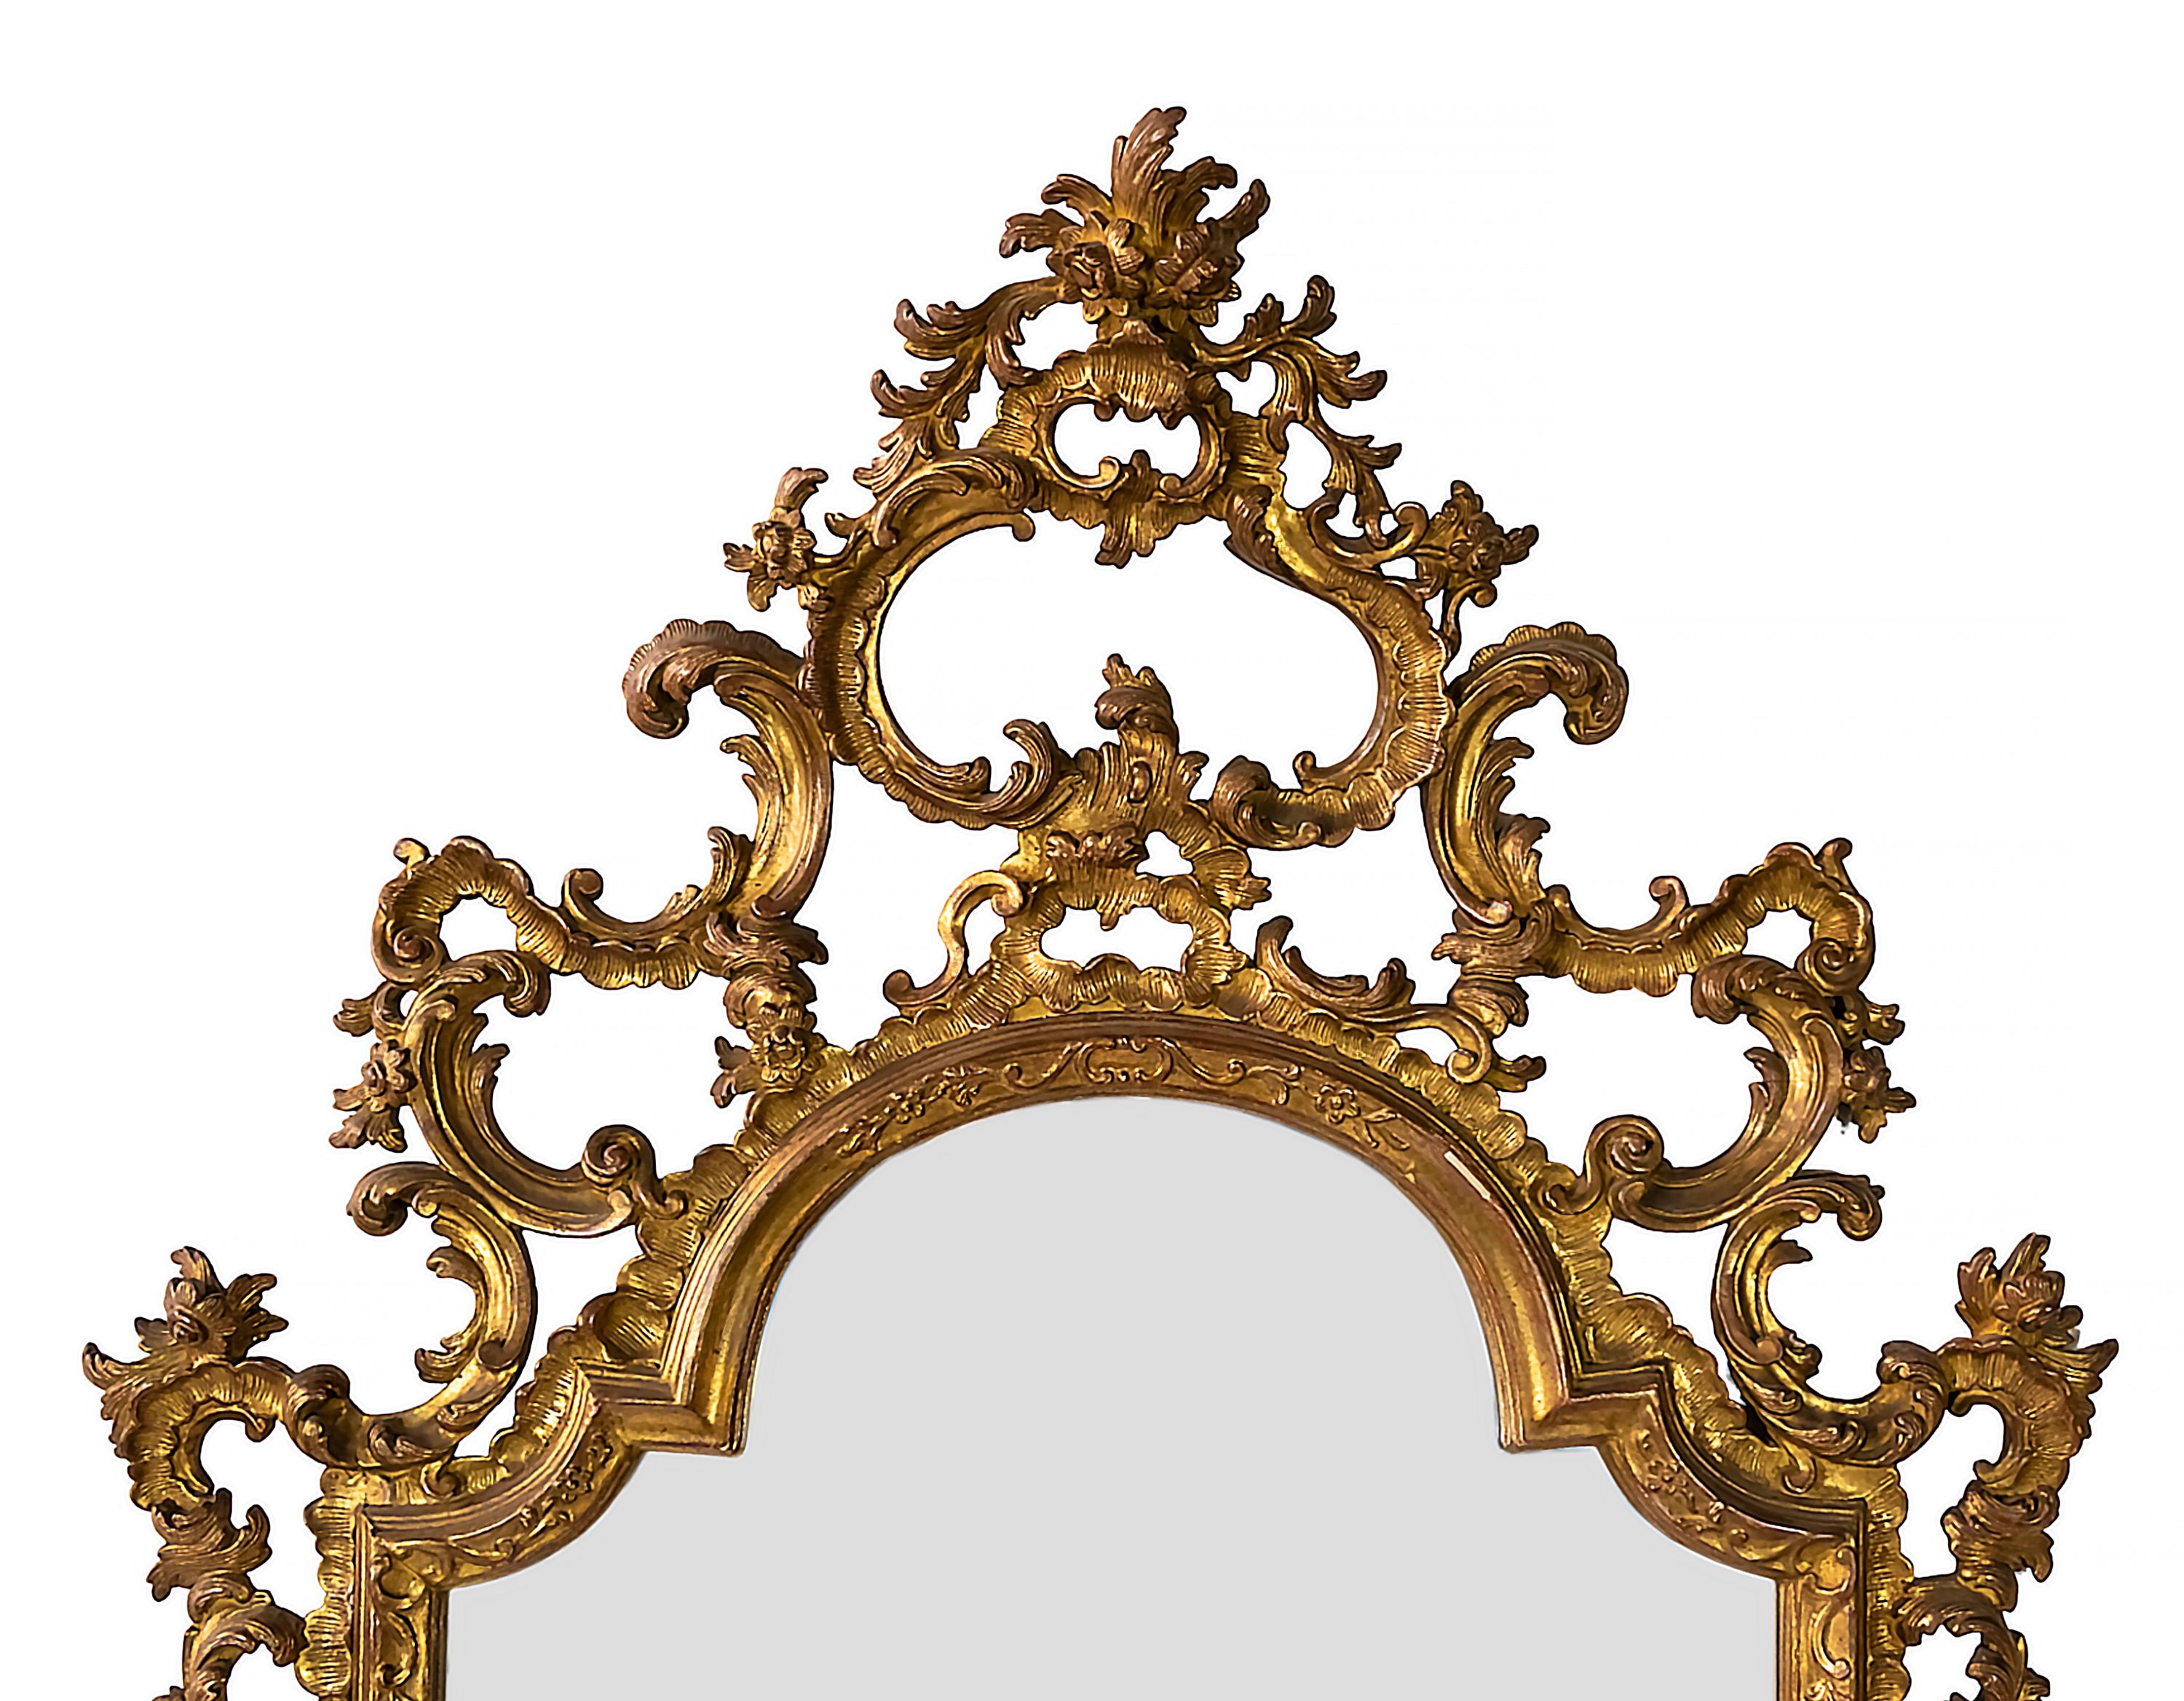 Italian baroque style hand-carved gilt wood wall mirror with faceted mirror edges.
Very good antique condition.





